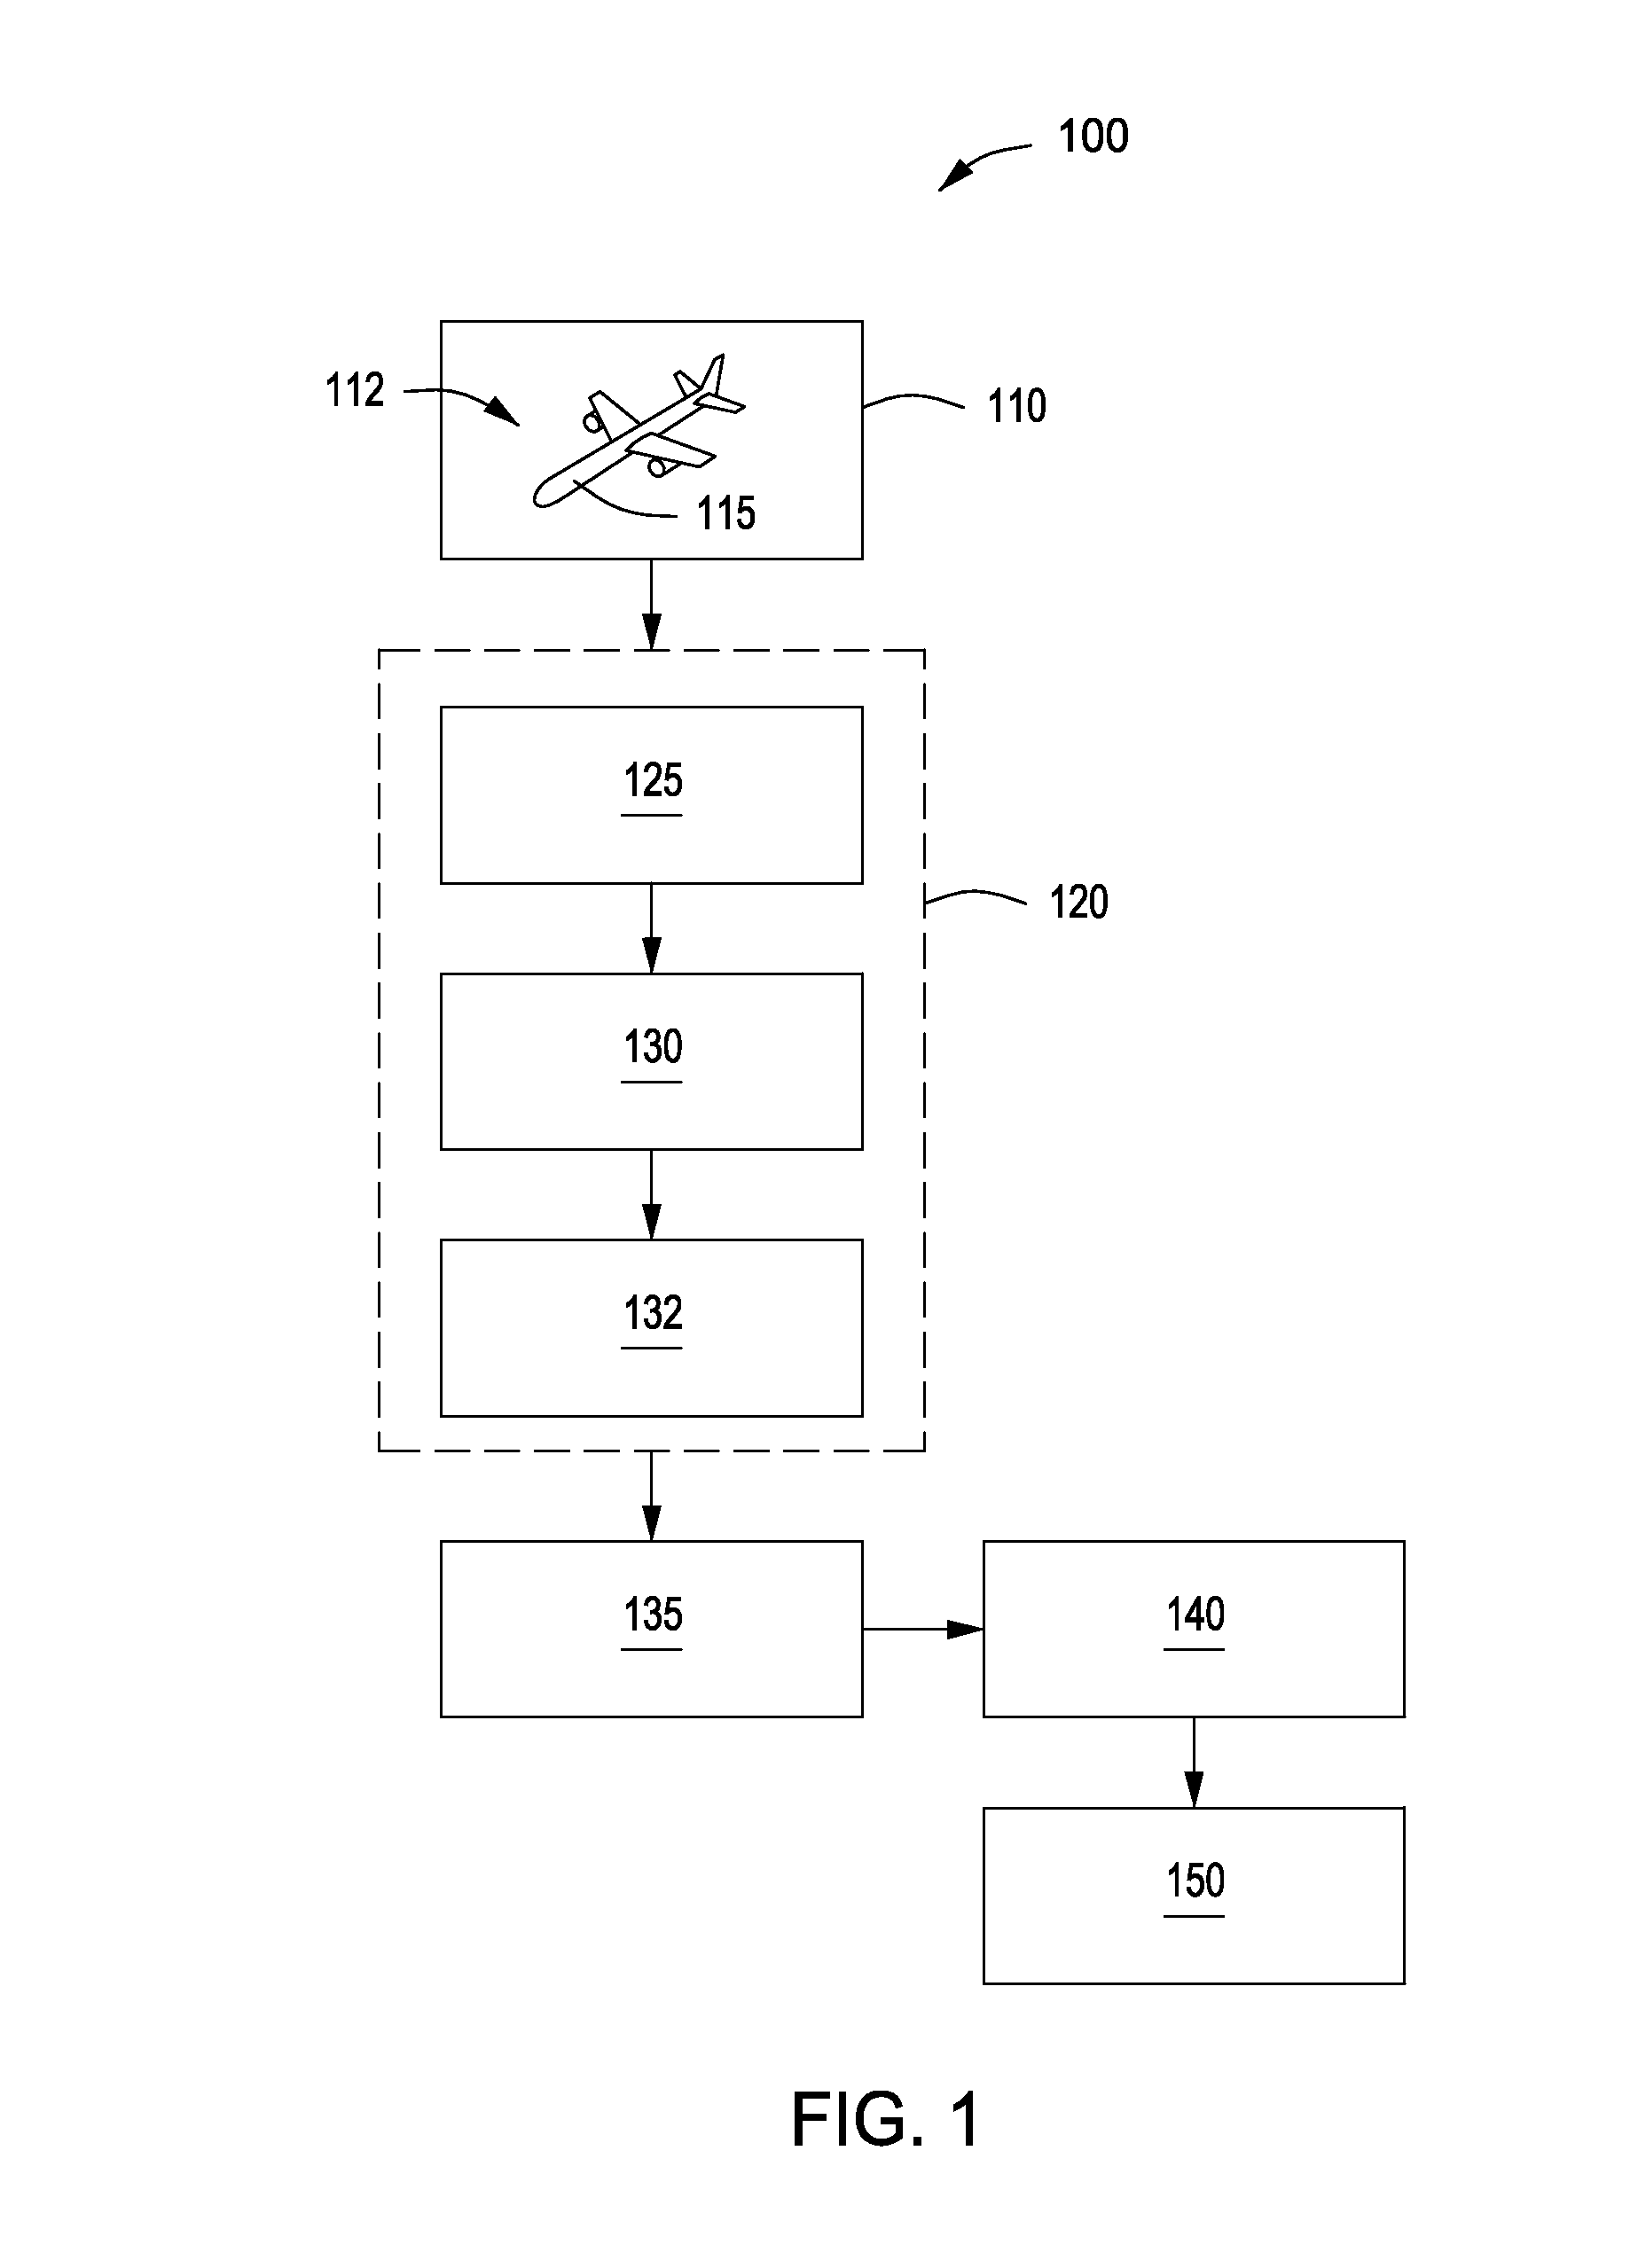 Systems and Methods for Runway Condition Alert and Warning